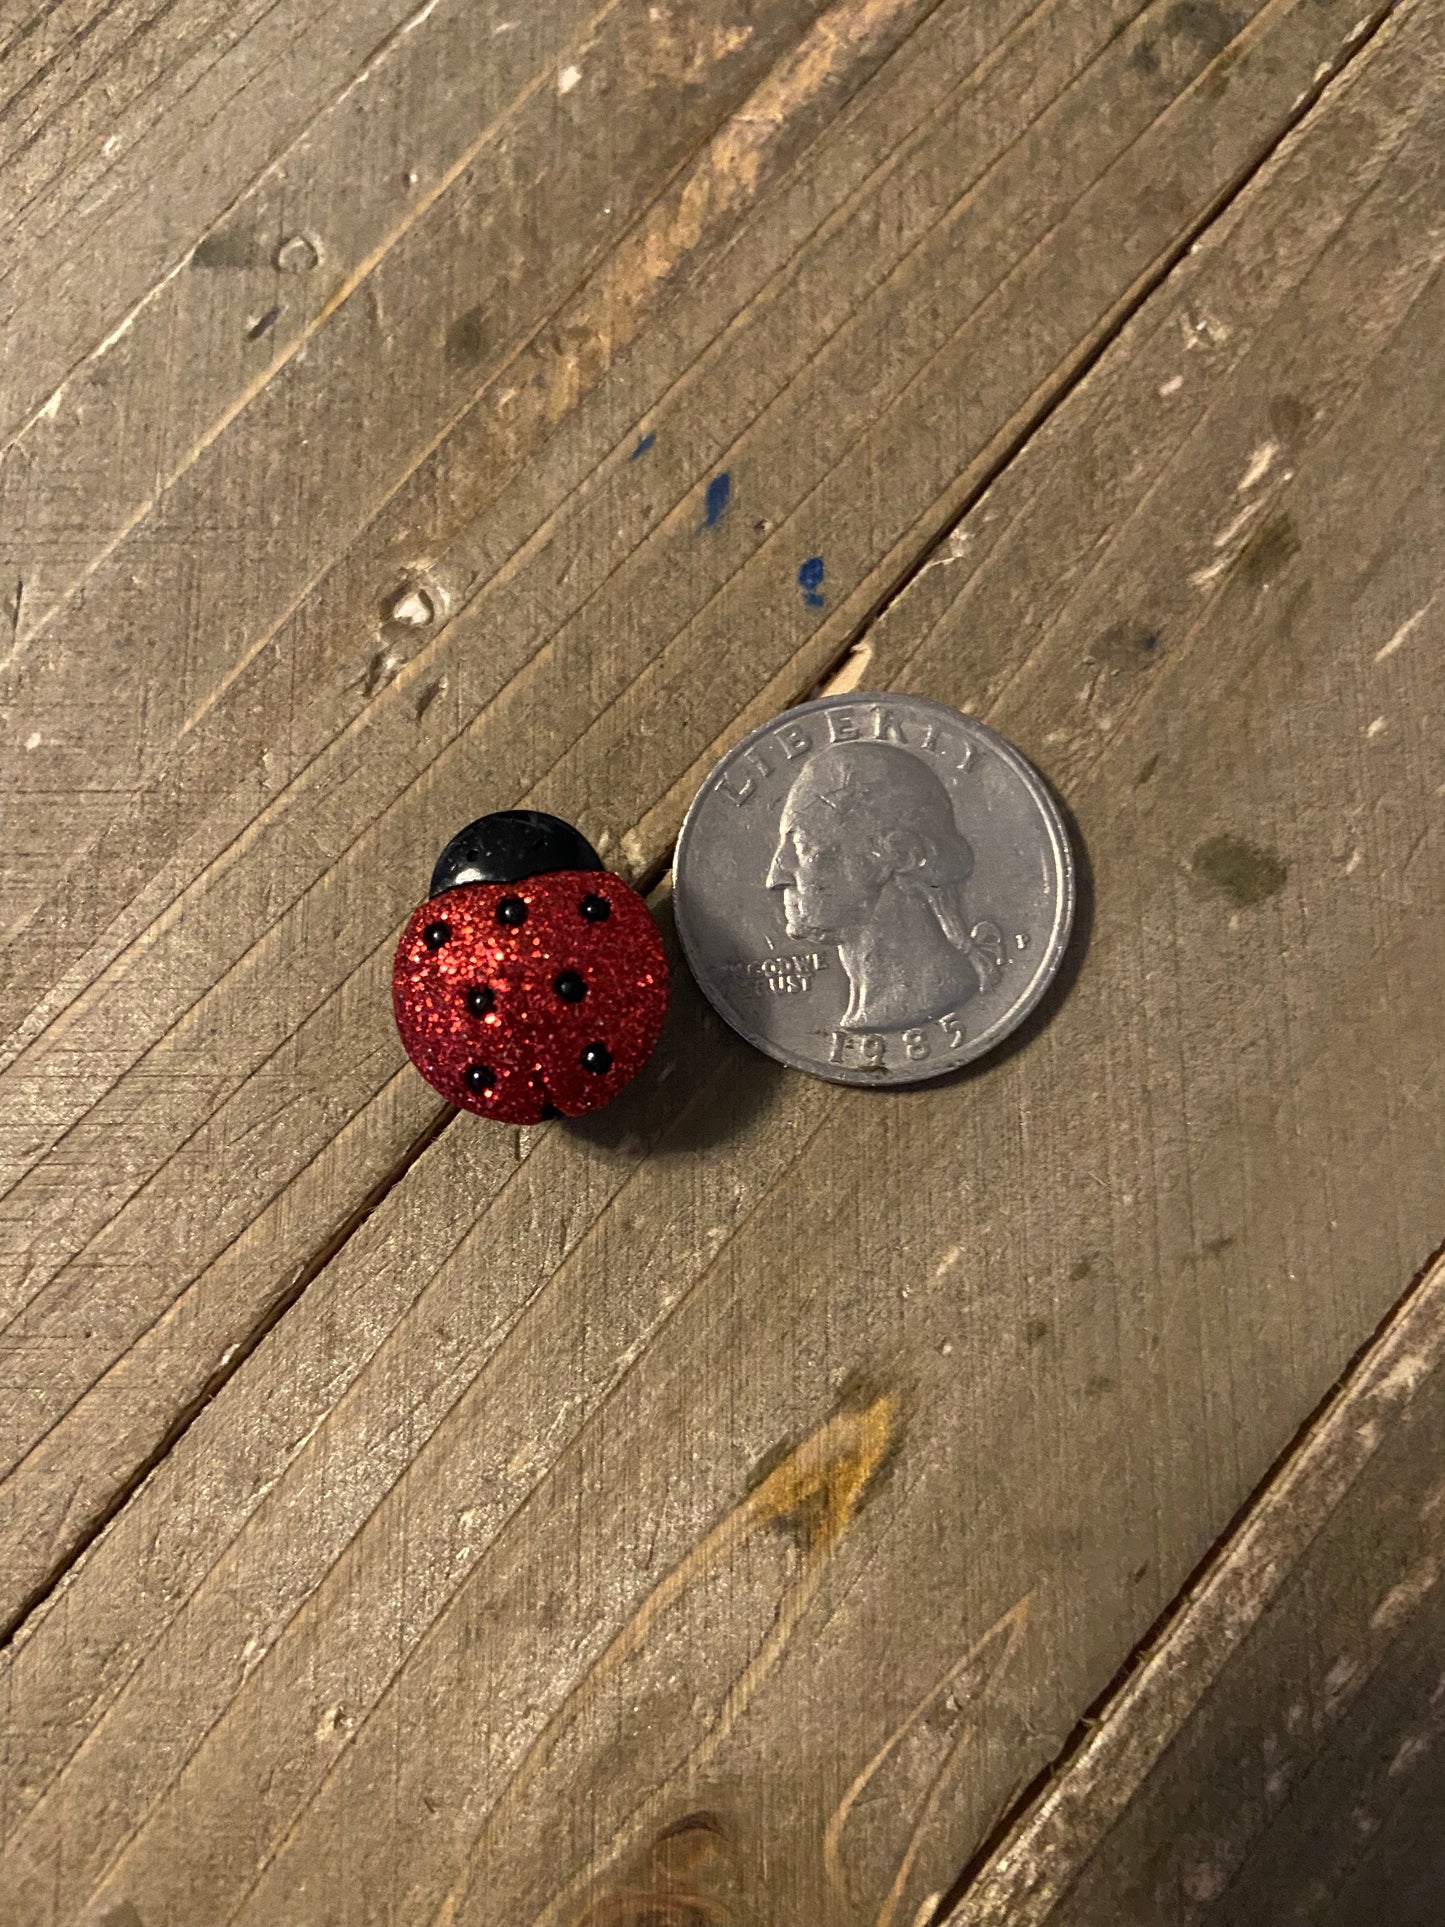 Sparkly Lady Bug Earrings (ER-160larger) Post earringsPink tiful of LOVE